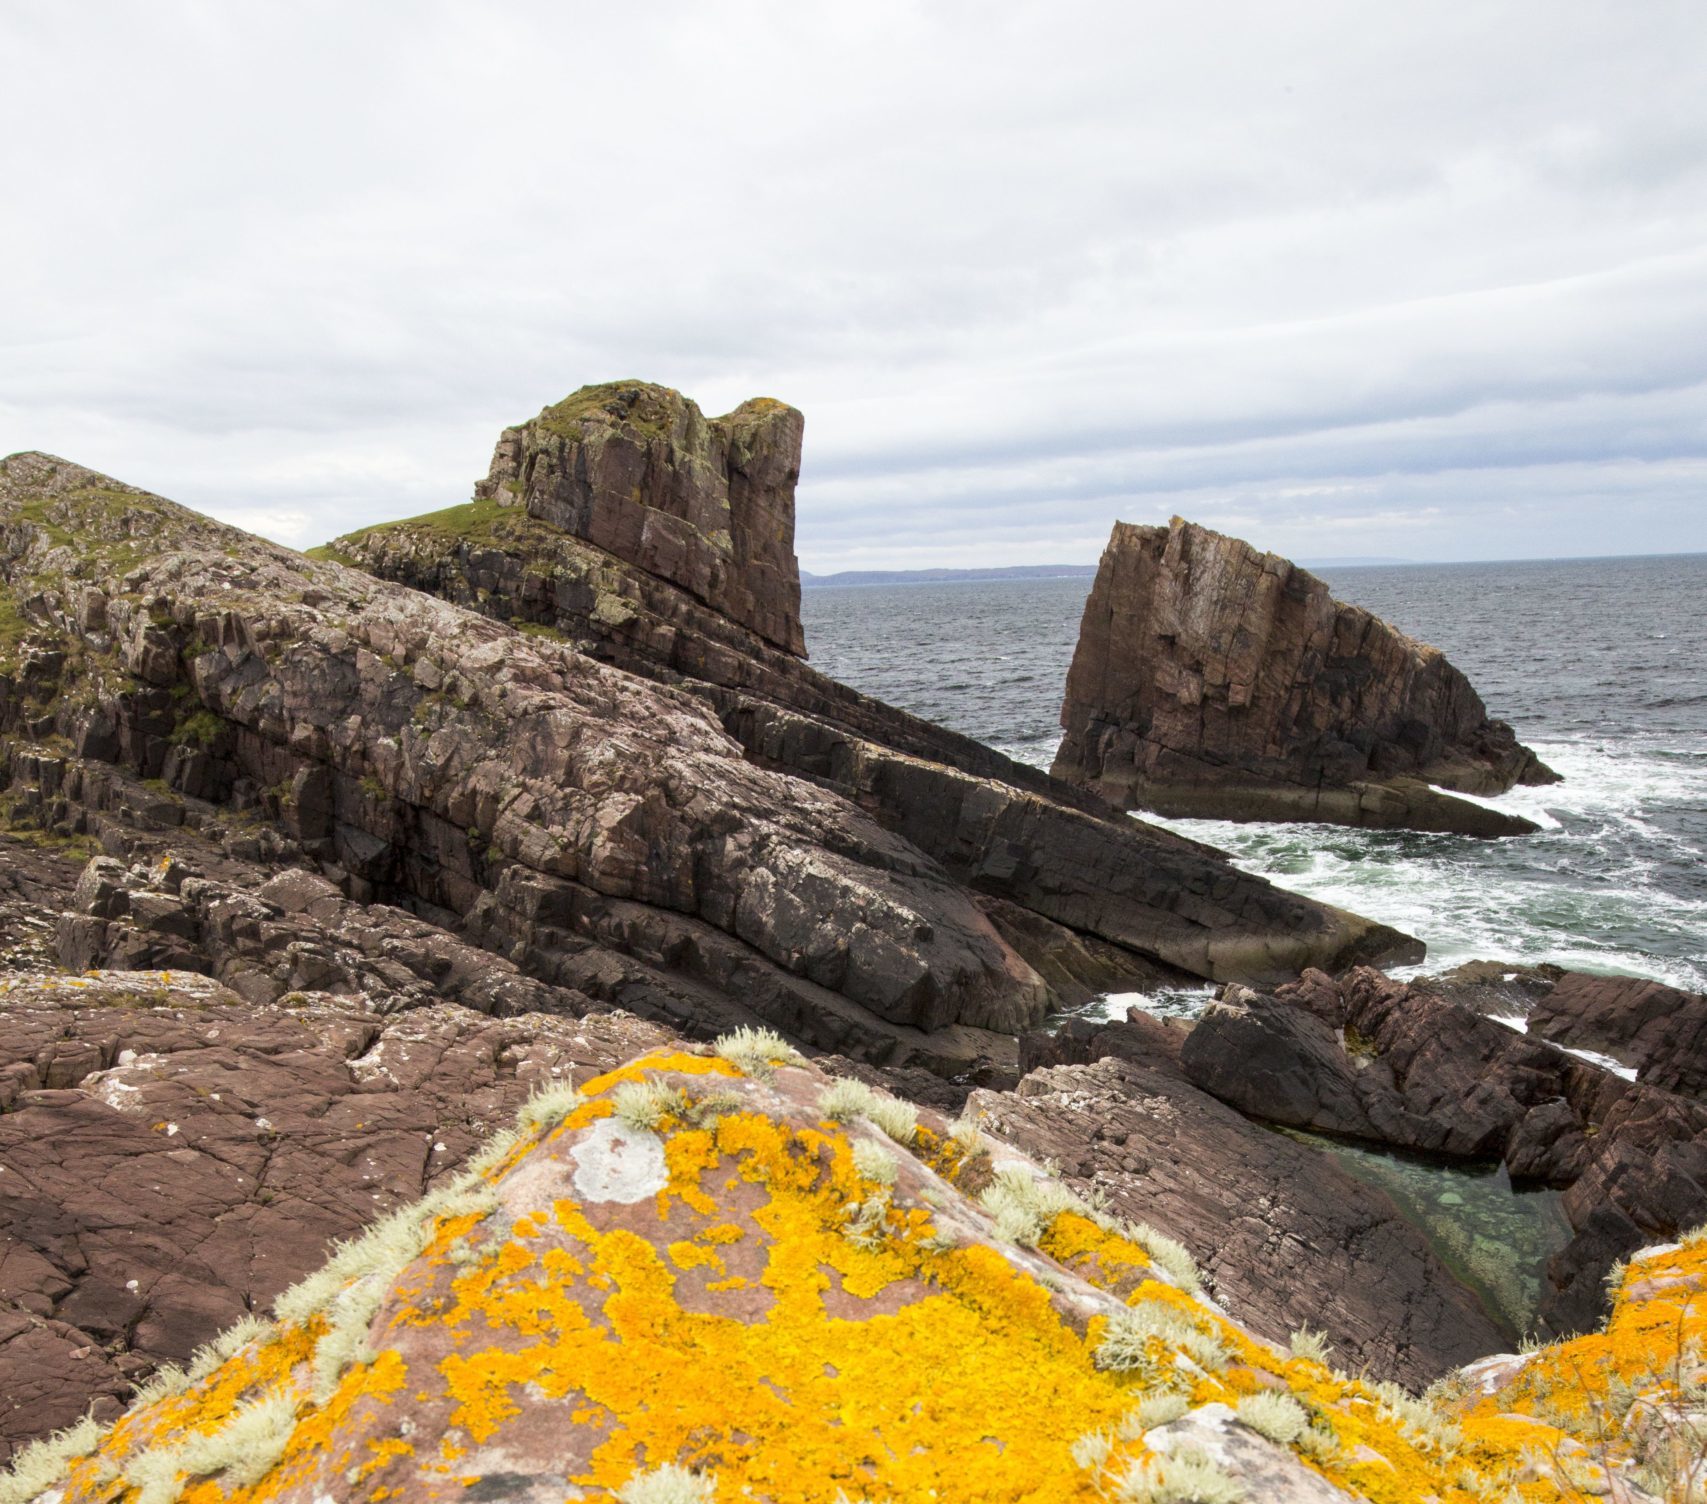 The famous split rock of Clachtoll, in Assynt, Sutherland